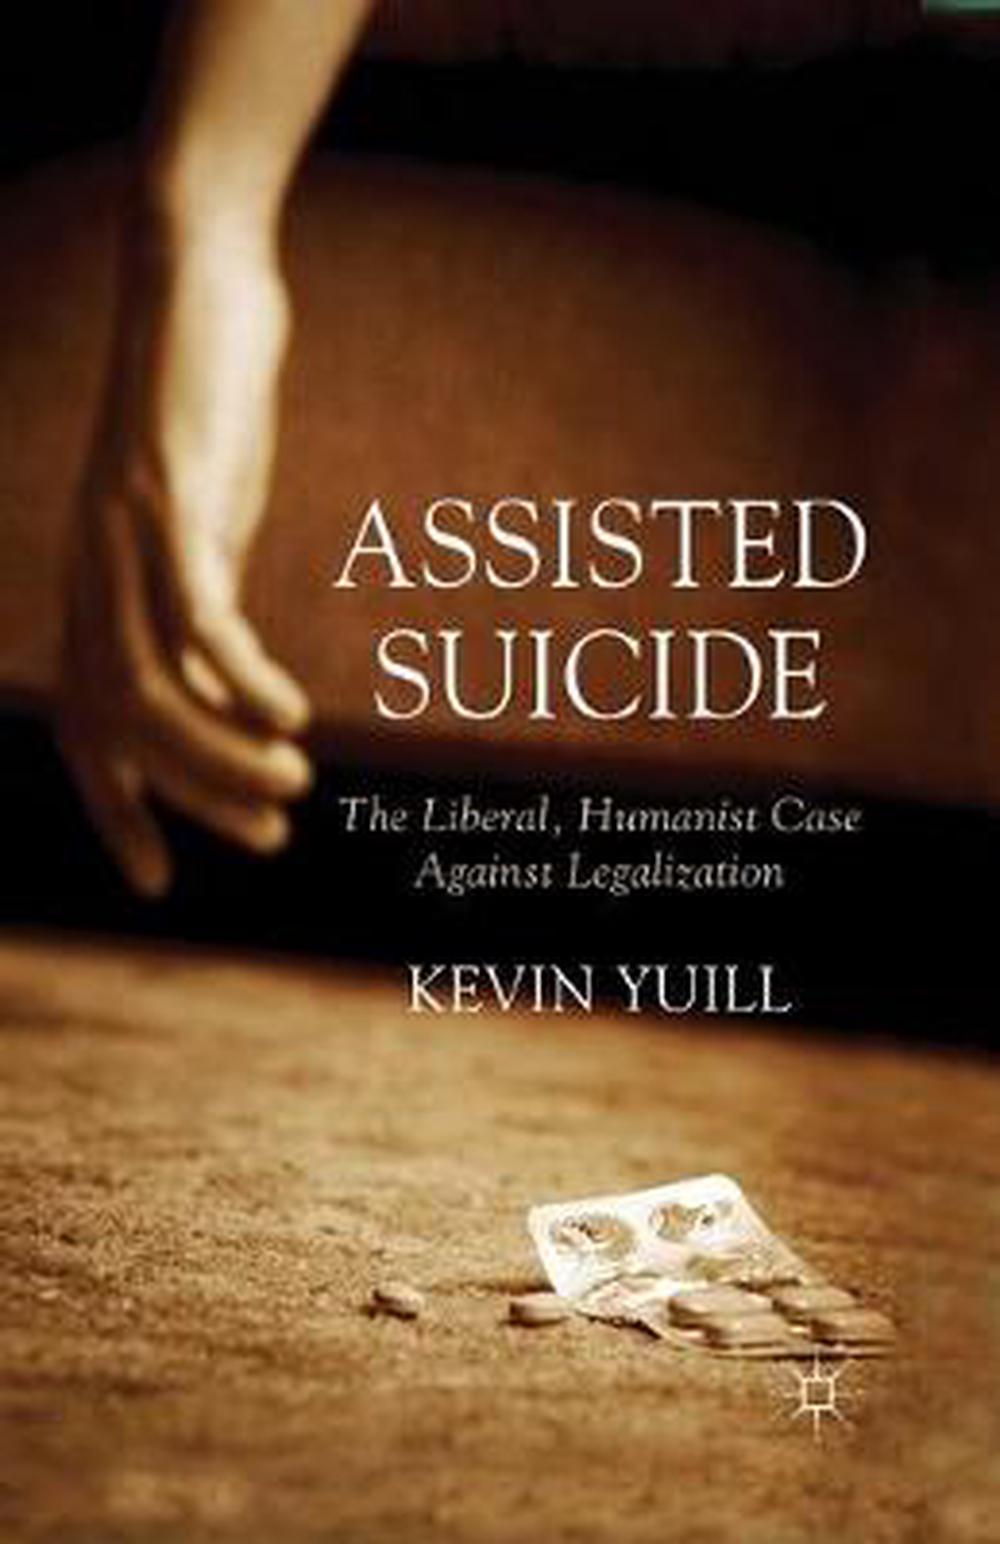 thesis statement about assisted suicide